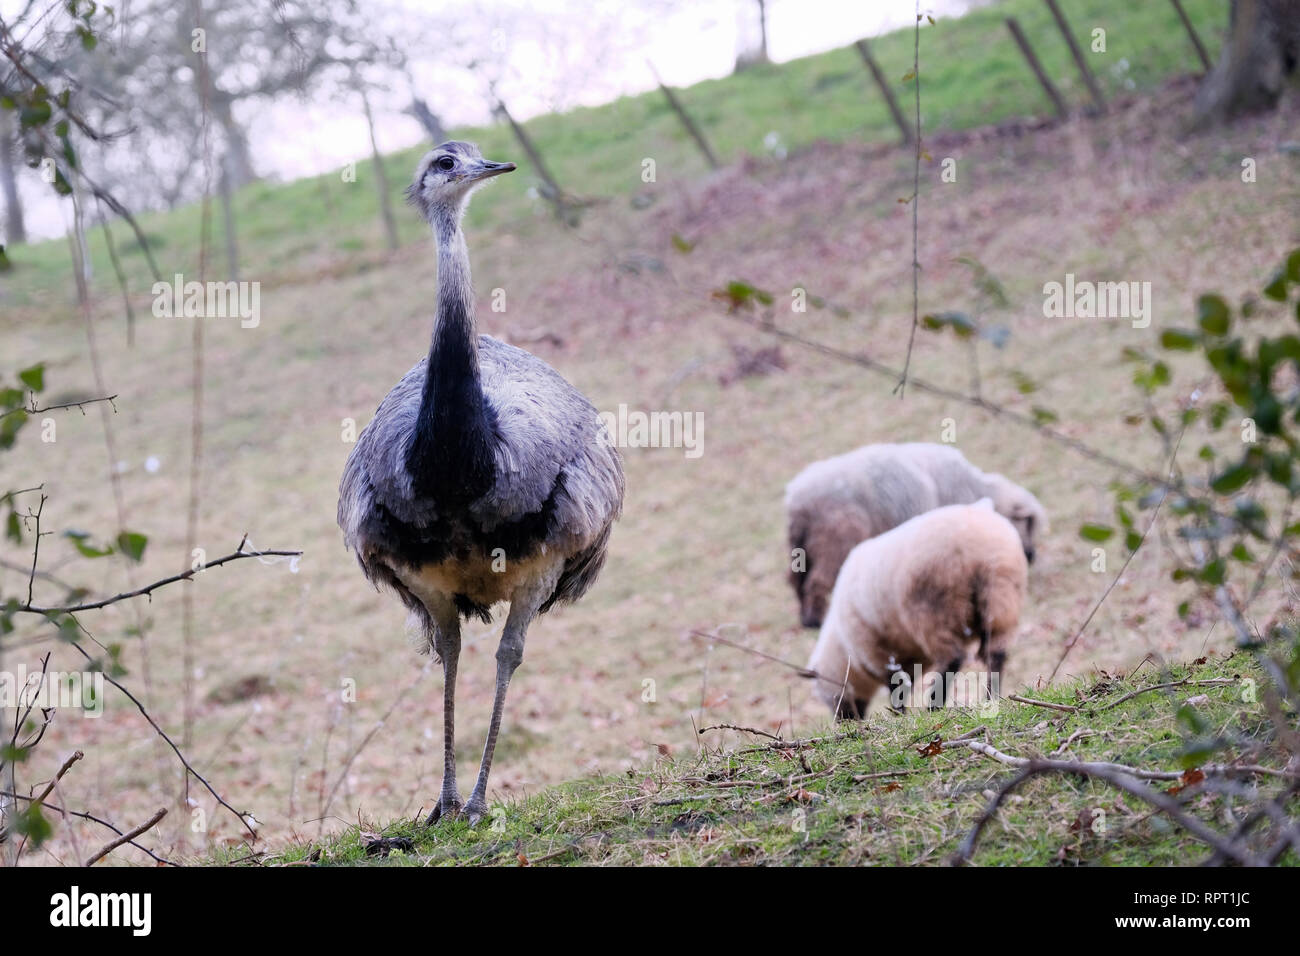 A Rhea in a farmers field in among sheep grazing in the same field. located in rural england Stock Photo